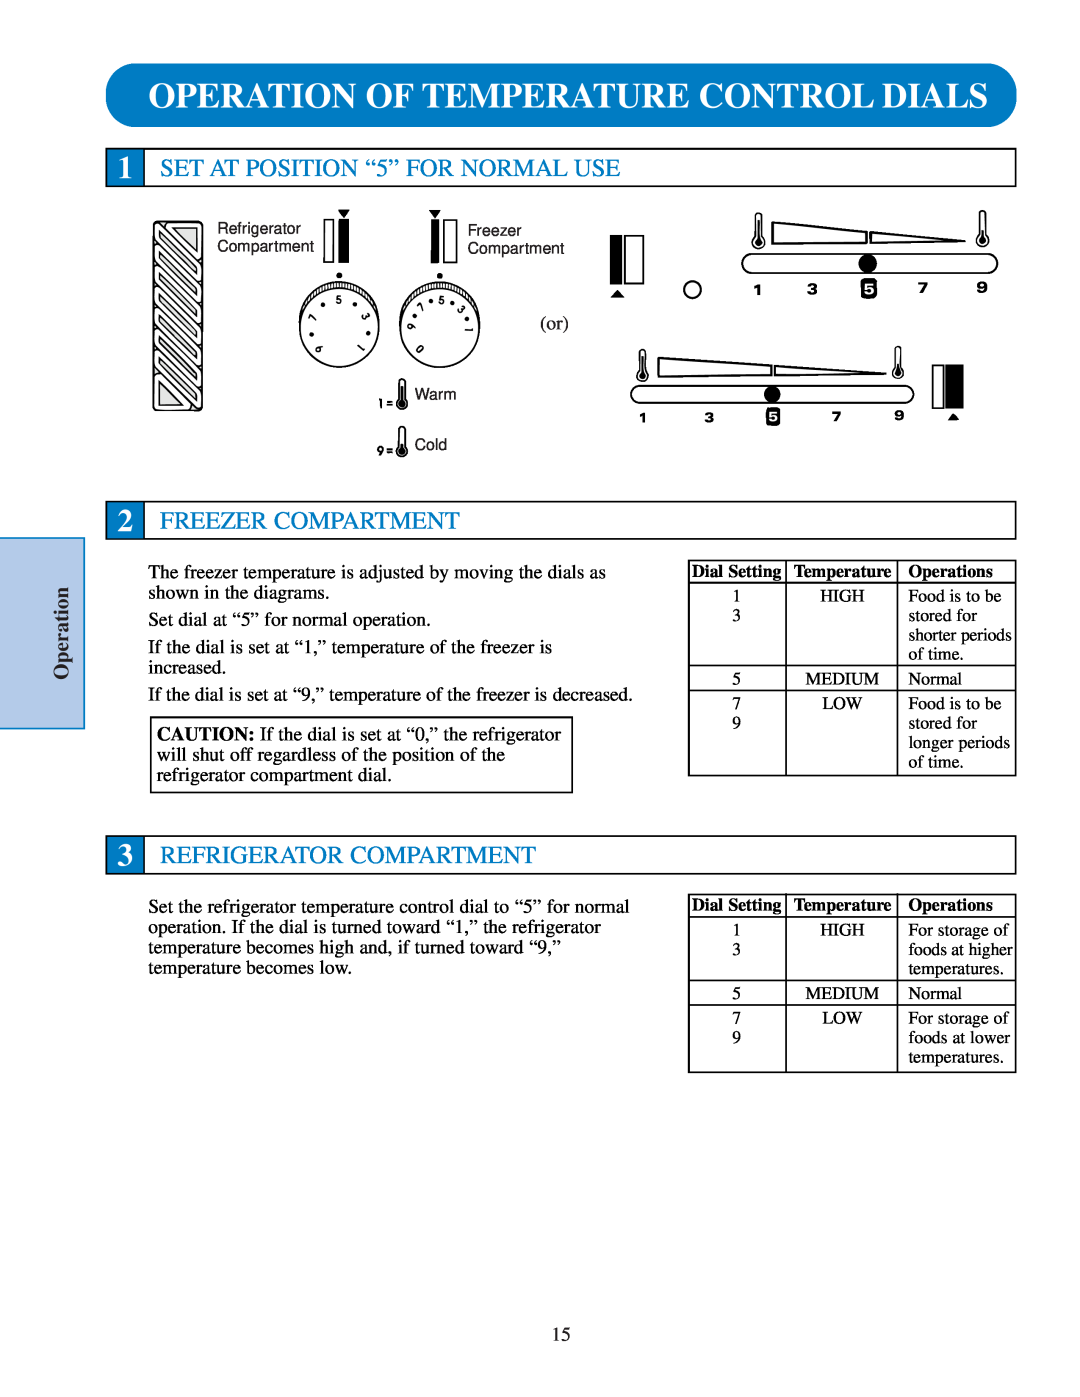 GE TFJ22PR, TPJ24PR manual Operation Of Temperature Control Dials, SET AT POSITION “5” FOR NORMAL USE, Freezer Compartment 